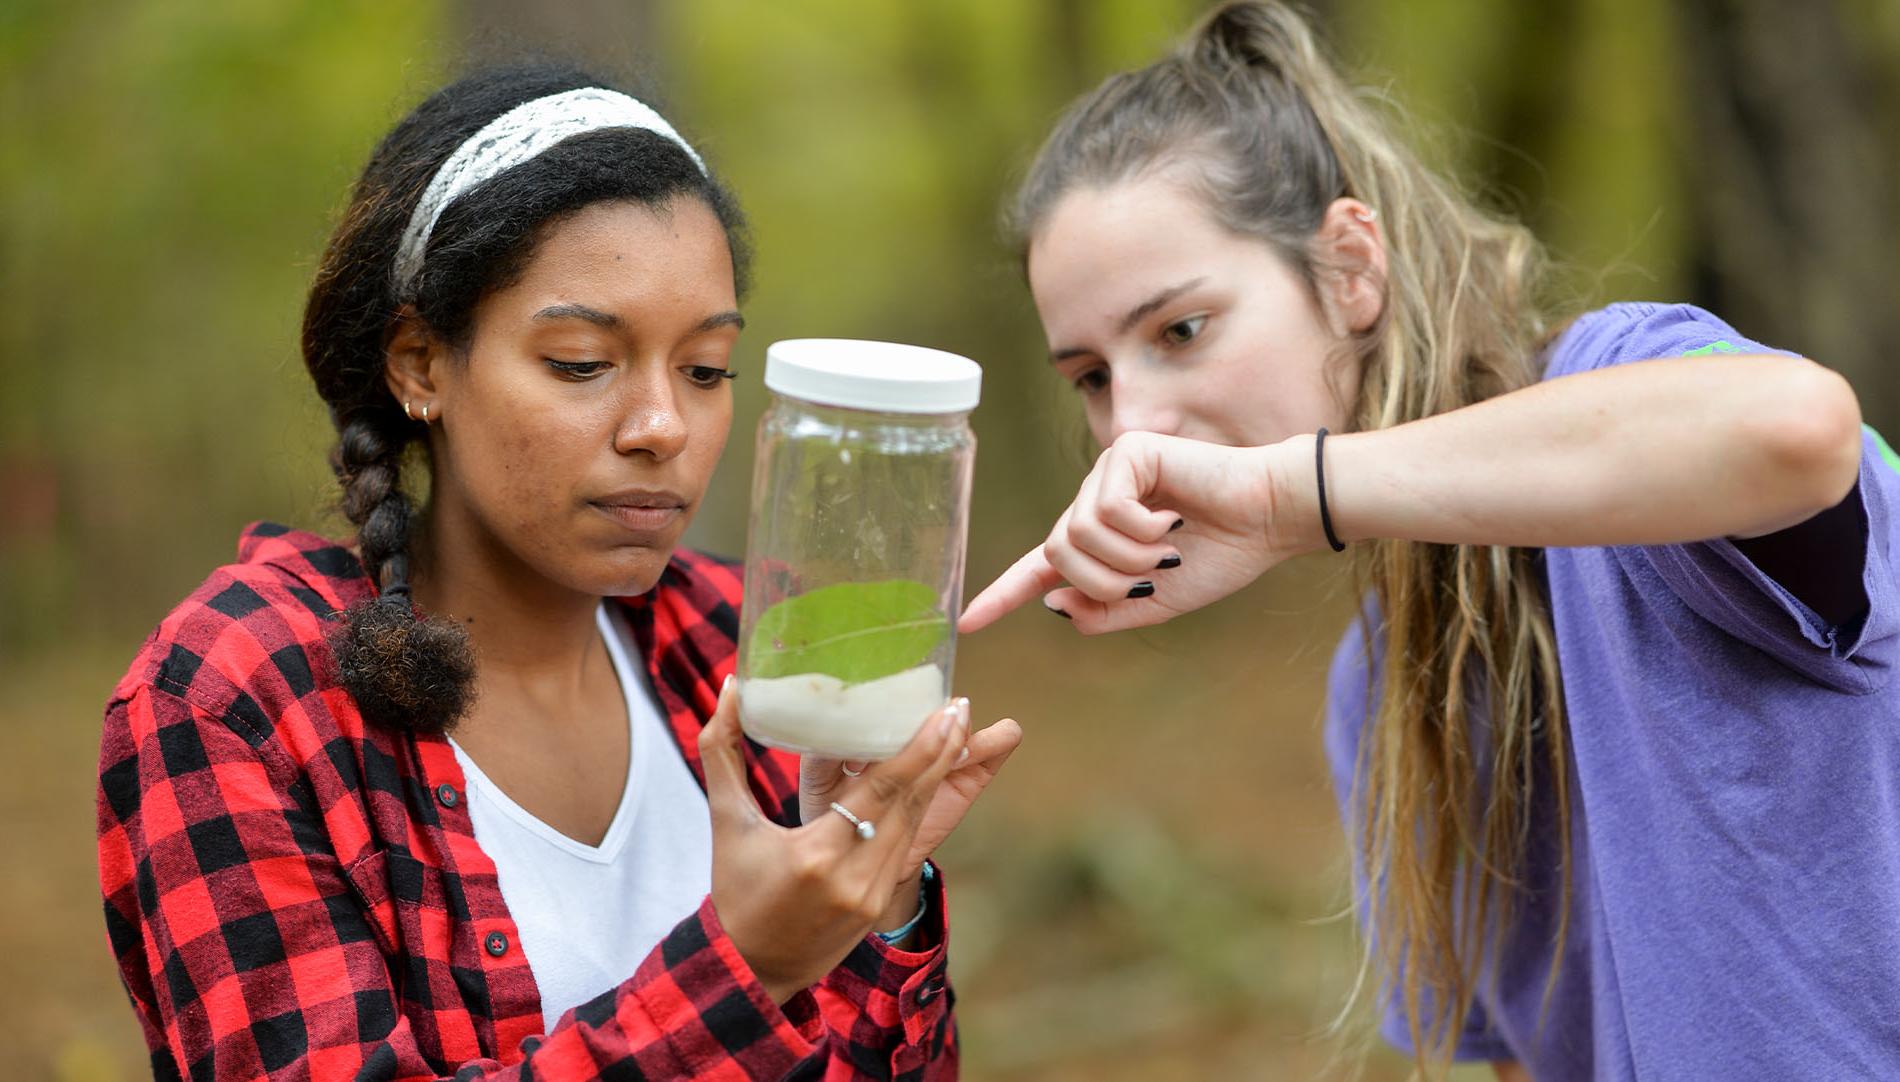 two female students examening plants and specimen in a glass jar